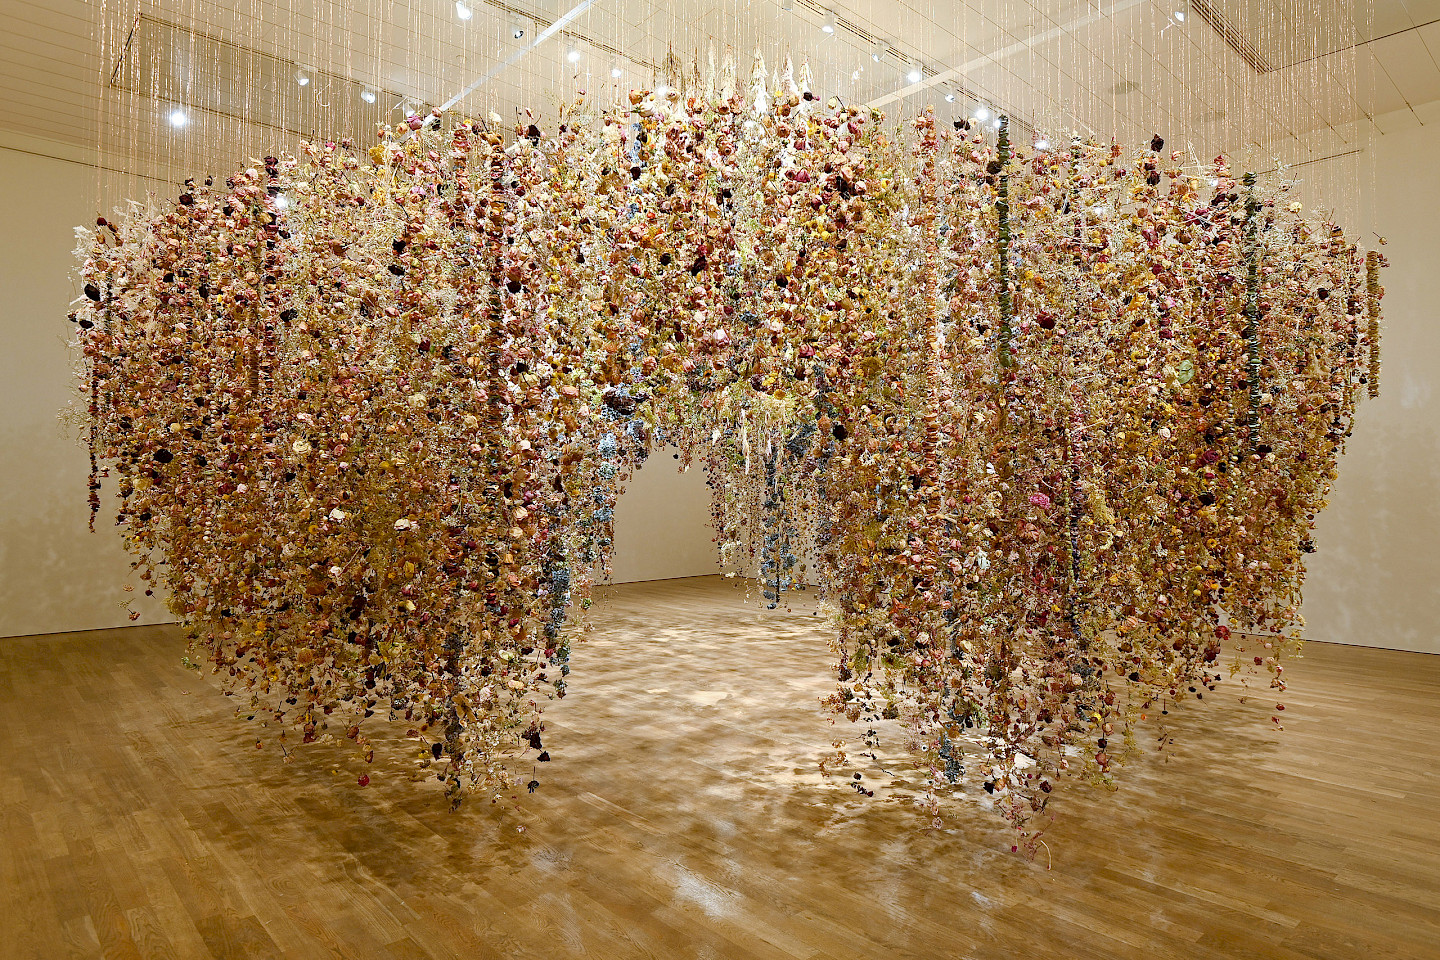 Installation "Calyx" made of dried flowers by Rebecca Louise Law at the Kunsthalle München